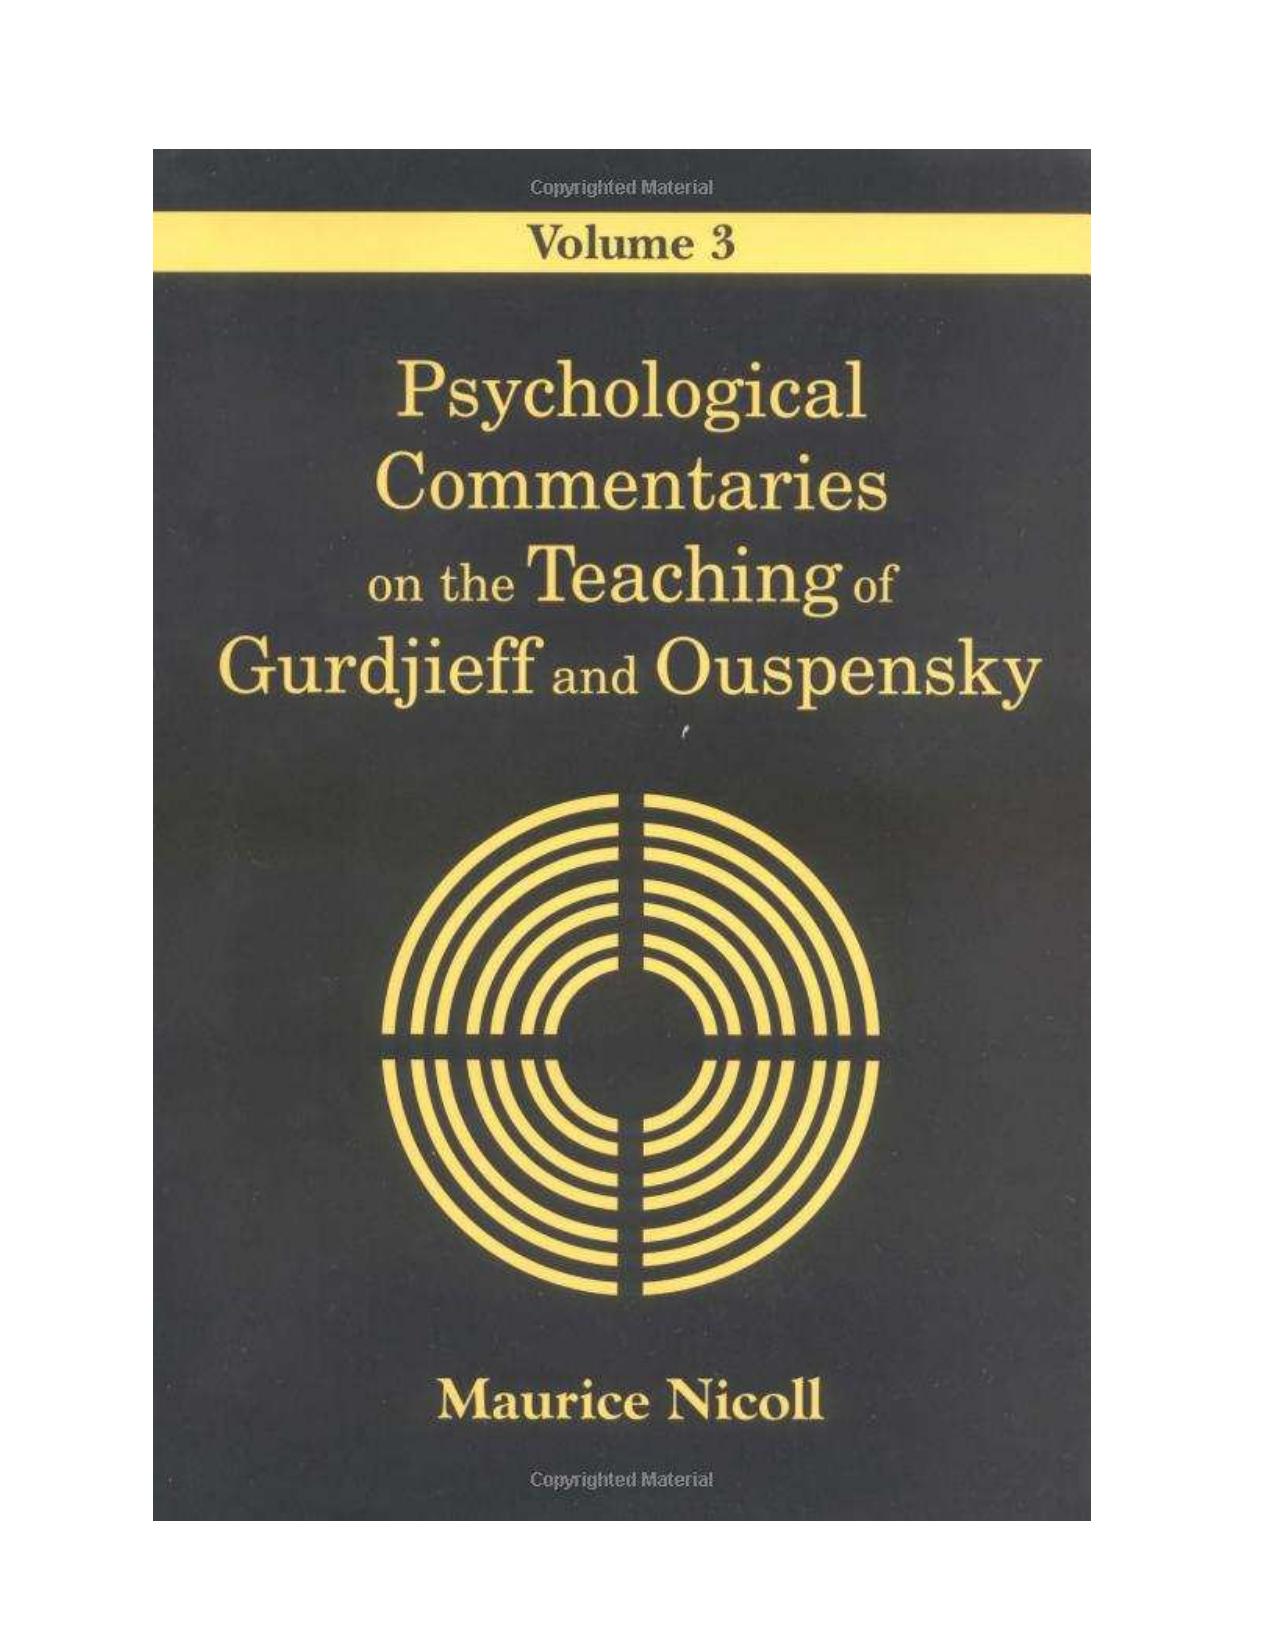 Psychological Commentaries on the Teaching of Gurdjieff and Ouspensky - Volume 3